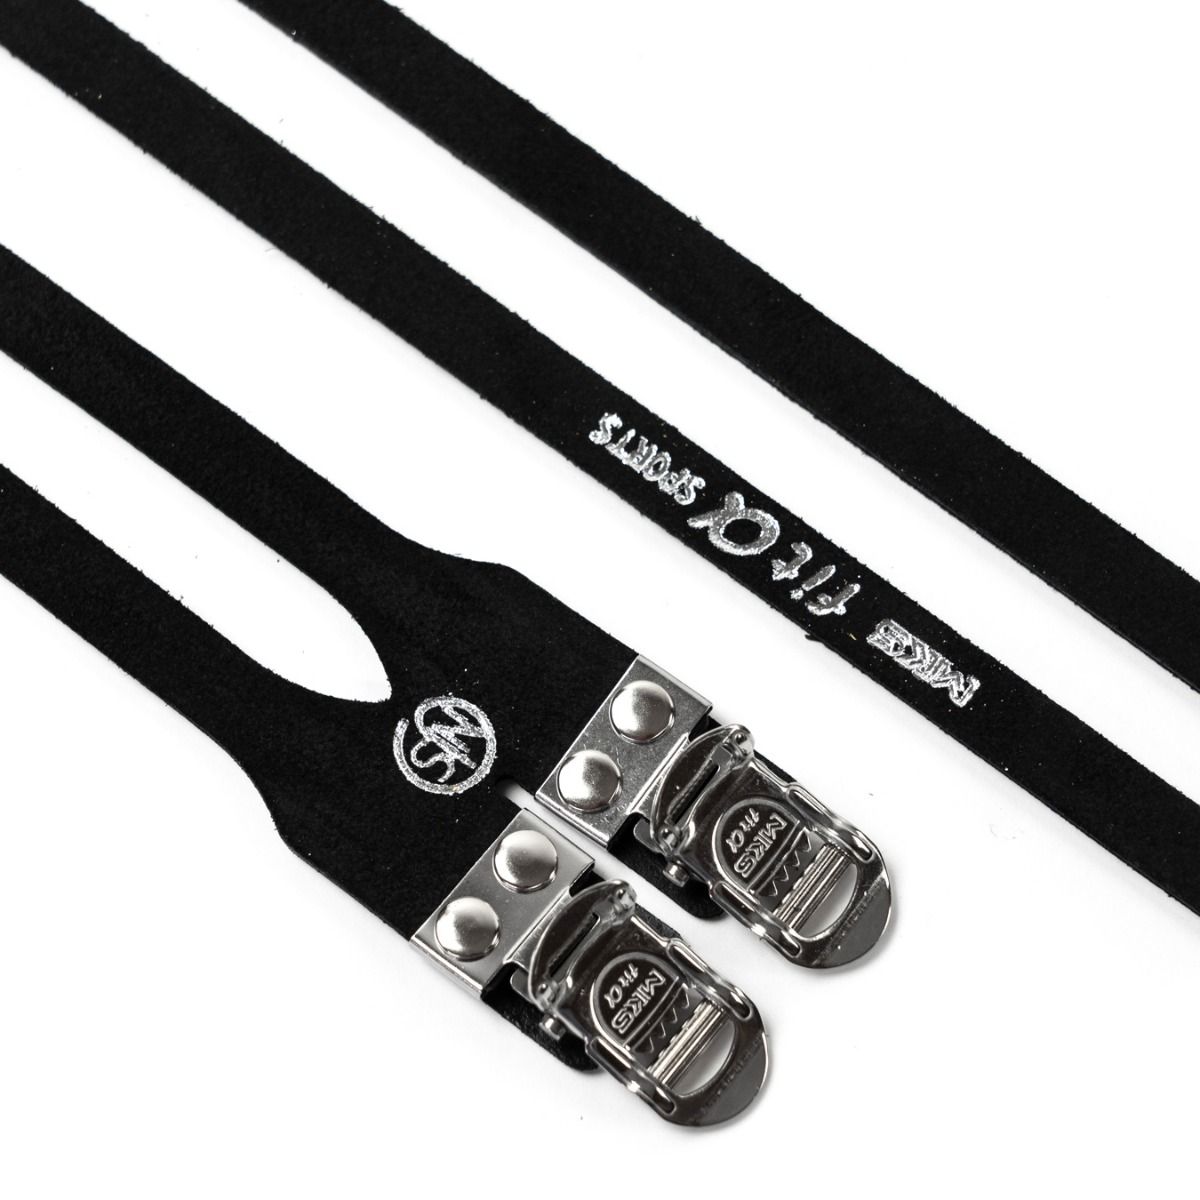 MKS - Fit-A Sports NJS double strap